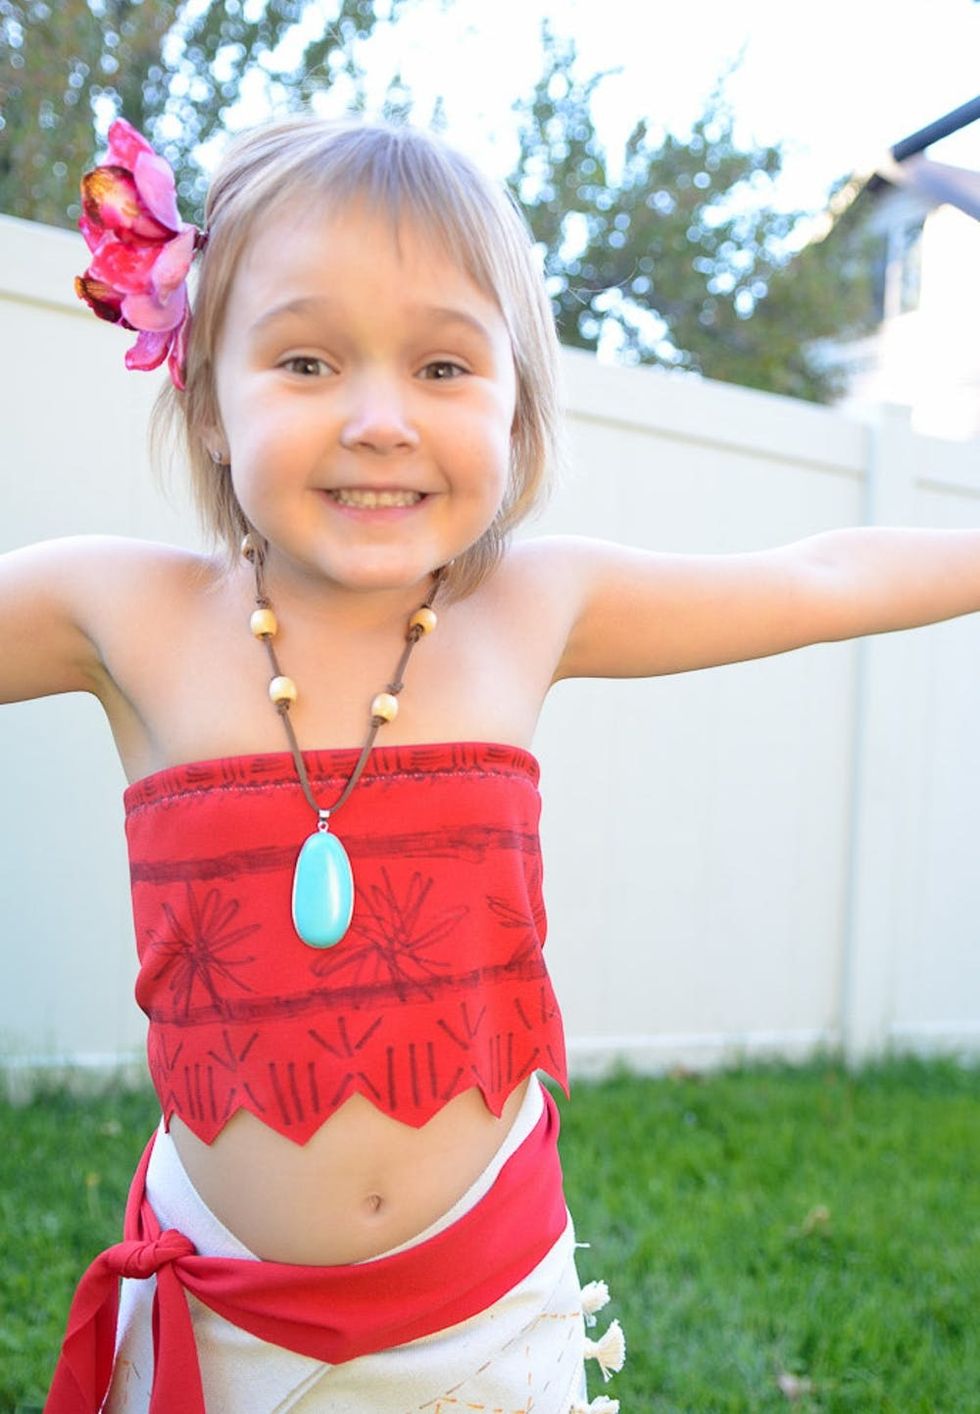 10 Moana Halloween Costume Ideas for Ladies of All Ages - Brit + Co